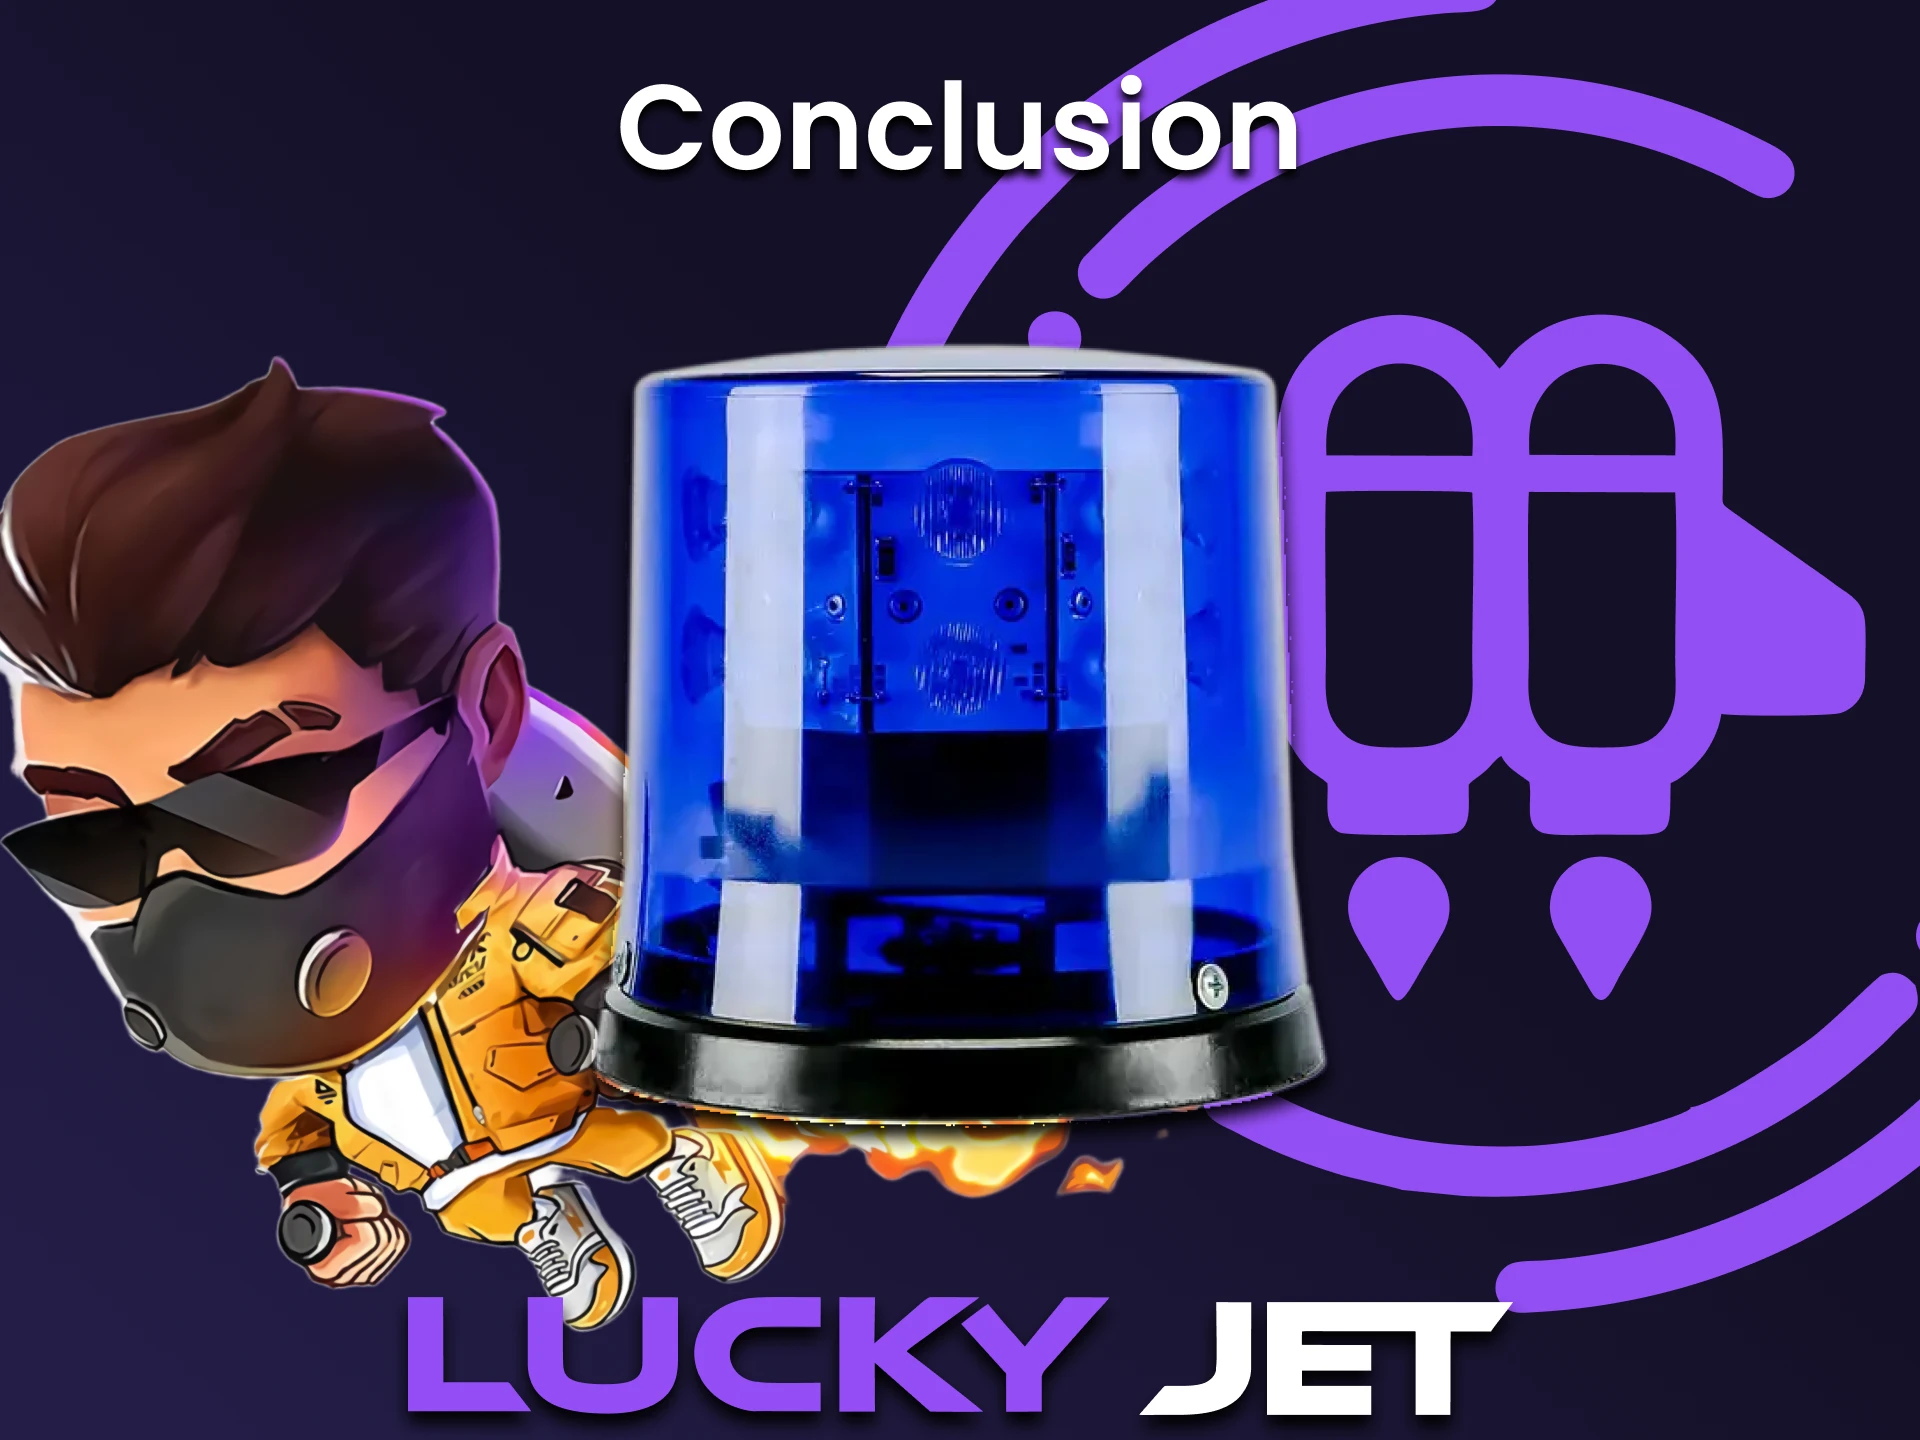 The choice is yours to use signals for Lucky Jet or not.